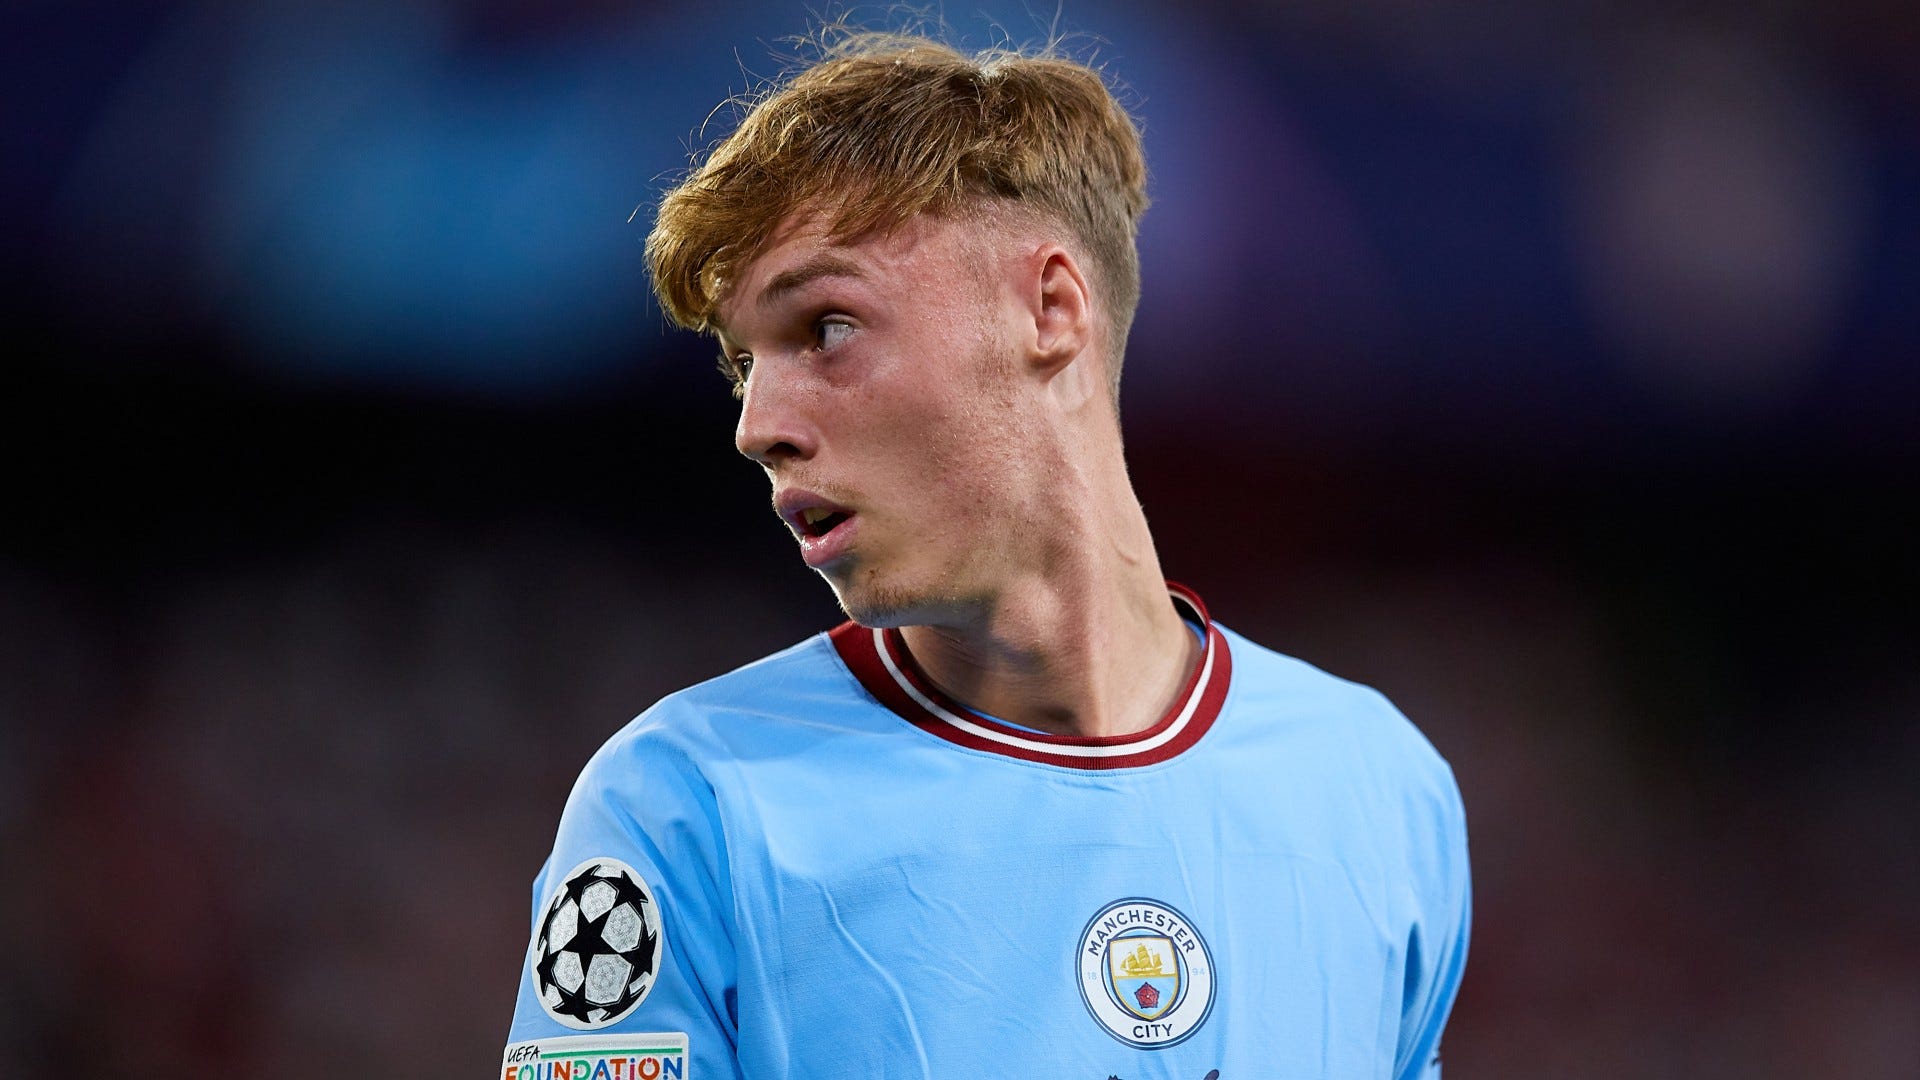 Chelsea transfer news and rumours today Blues told to shell out £45m to sign Cole Palmer from Manchester City Goal